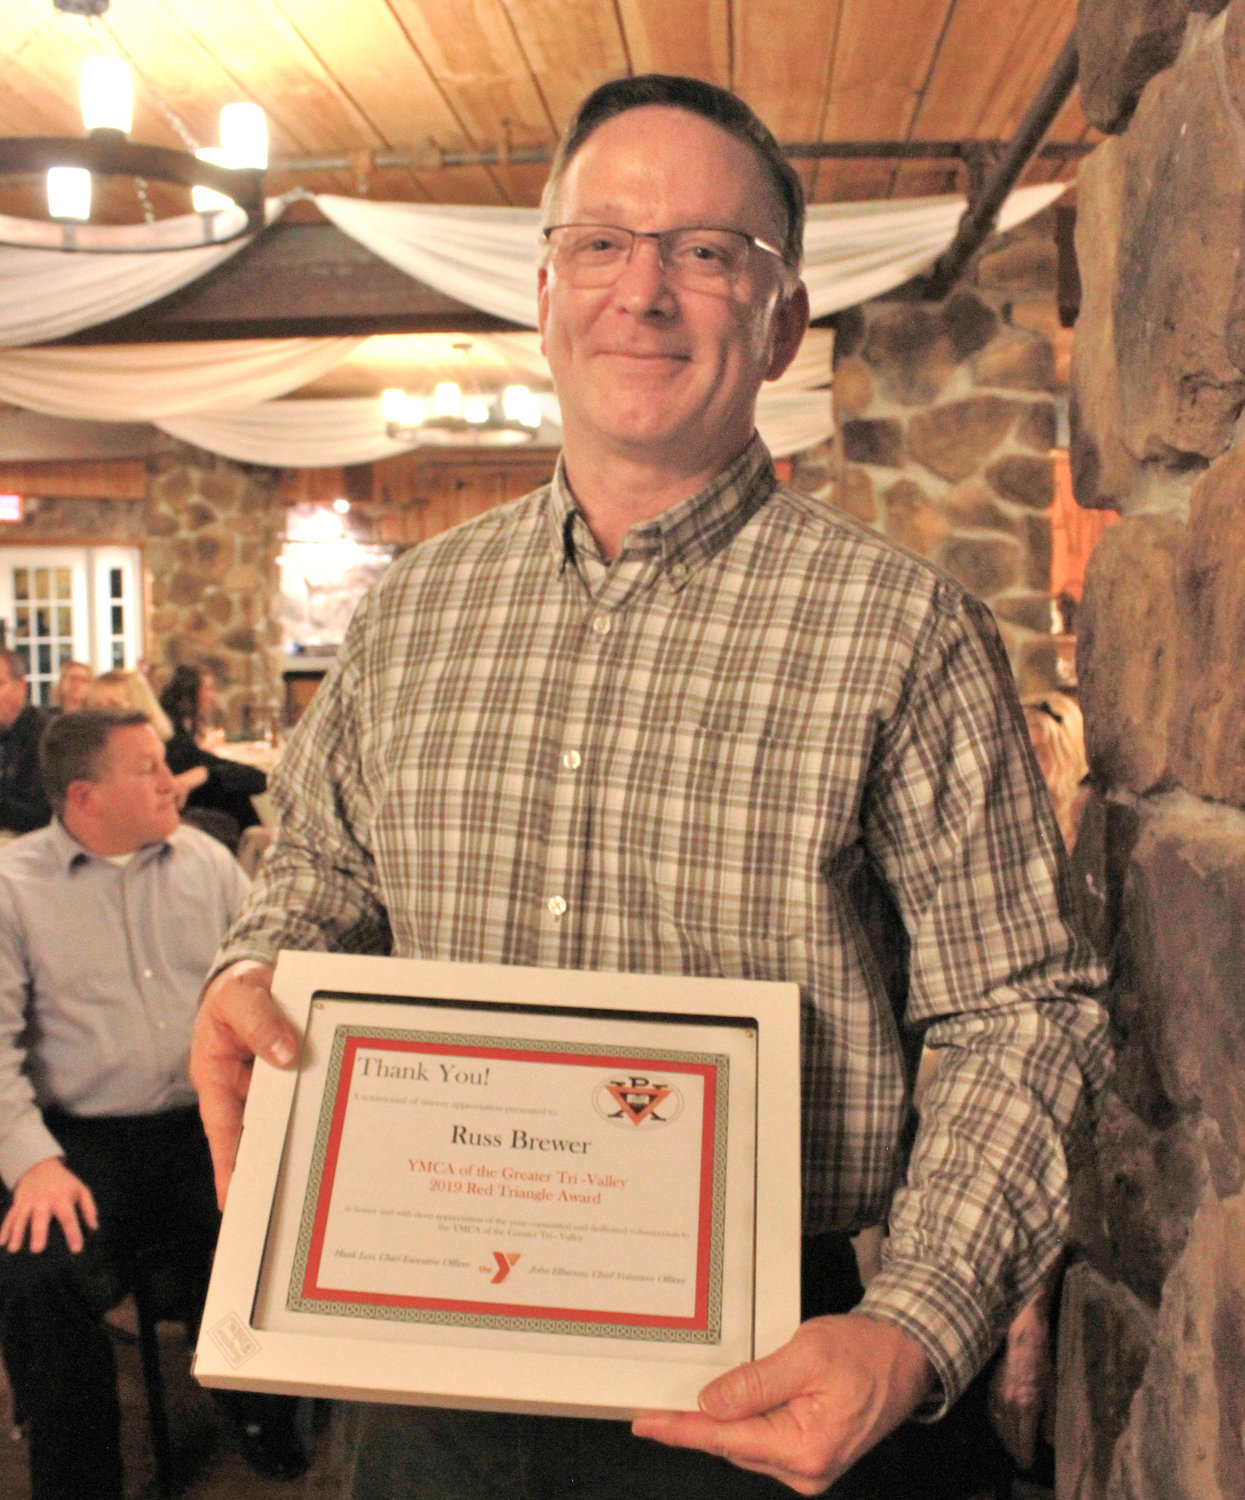 RED TRIANGLE — Russ Brewer was awarded the Red Triangle at the annual YMCA 2020 Recognition Program on Wednesday.